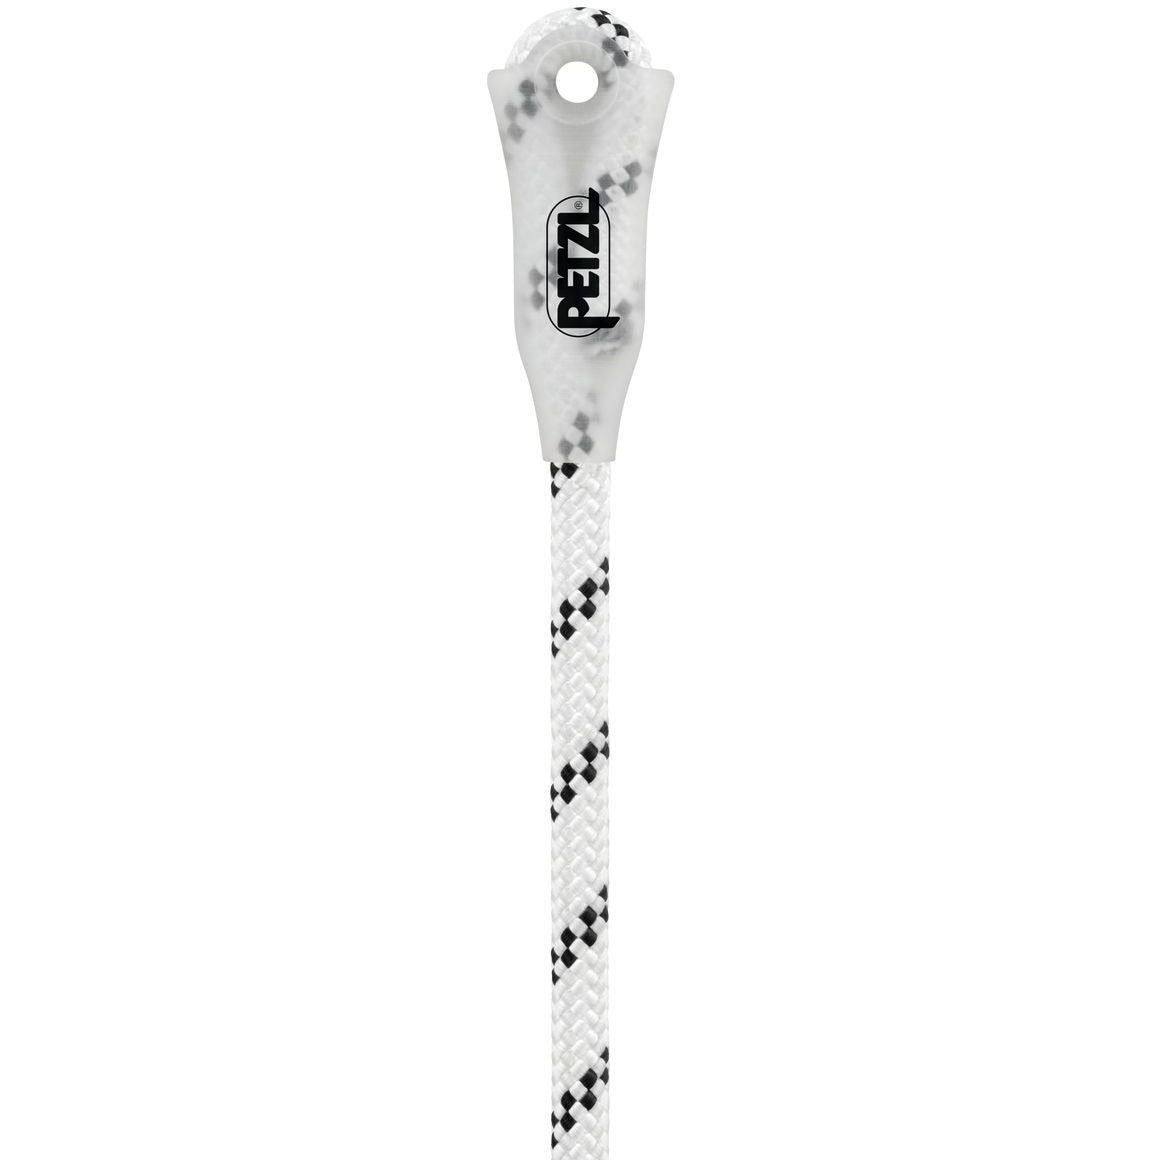 Petzl Axis 11 mm Semi-Static Rope with Sewn Termination - Aerial Adventure Tech